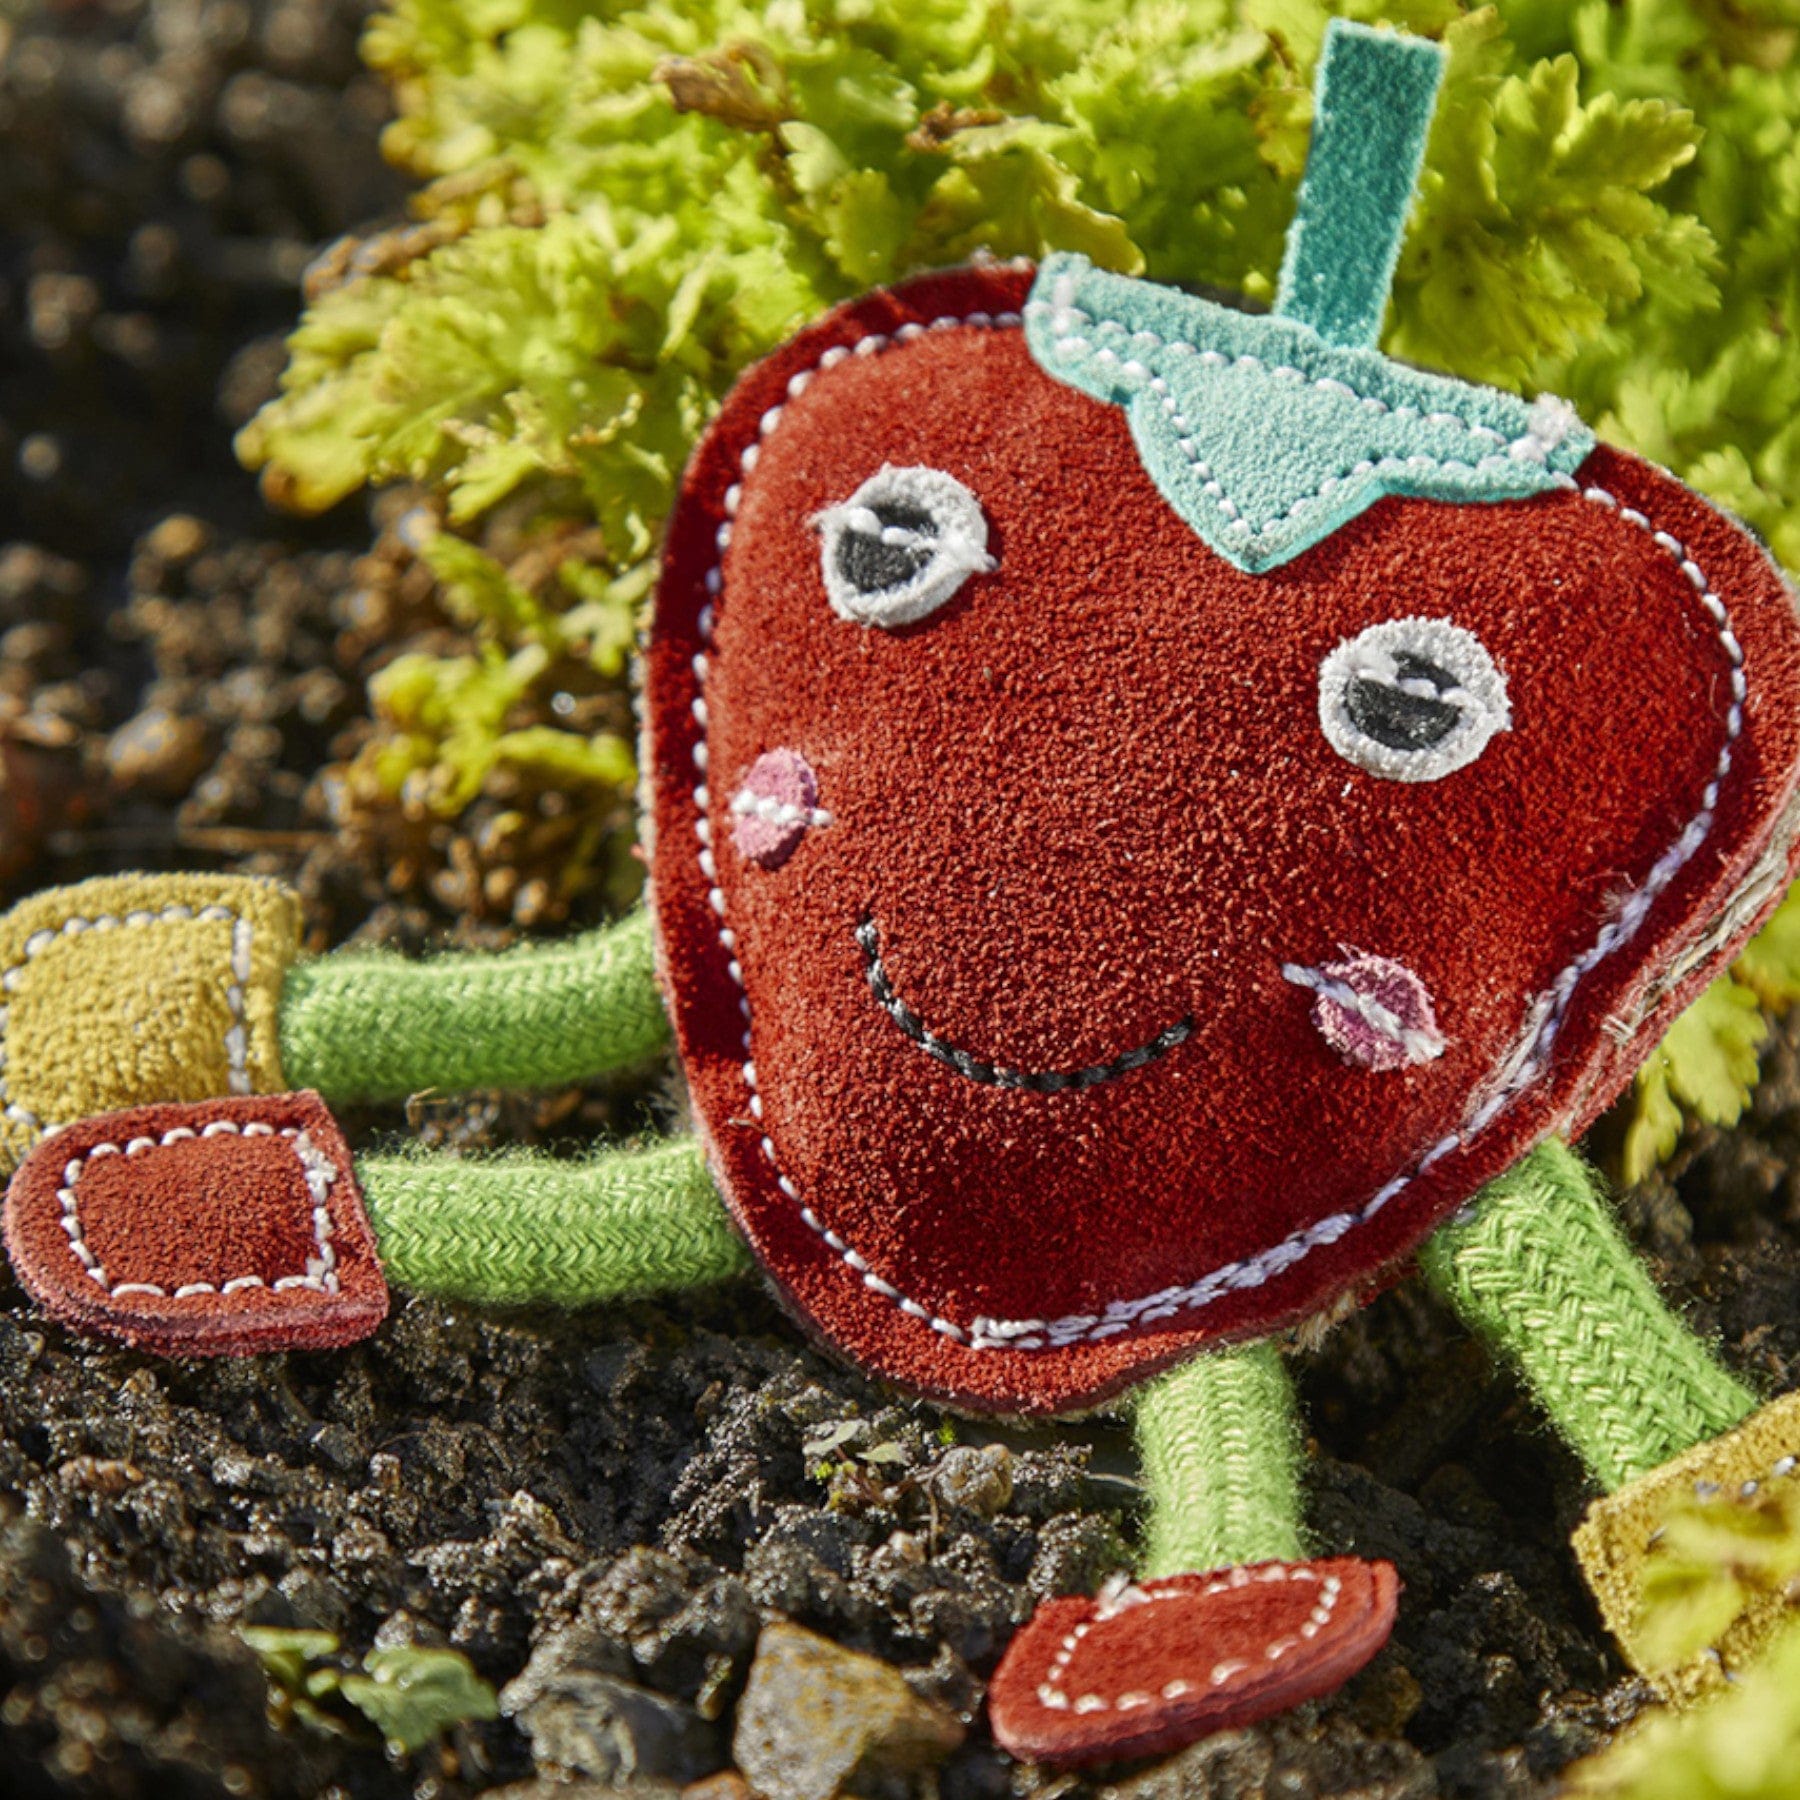 Alt text: Plush toy of a smiling strawberry character with arms and legs, sitting in a garden with lettuce in the background, detailed embroidery, crafted for play and education.